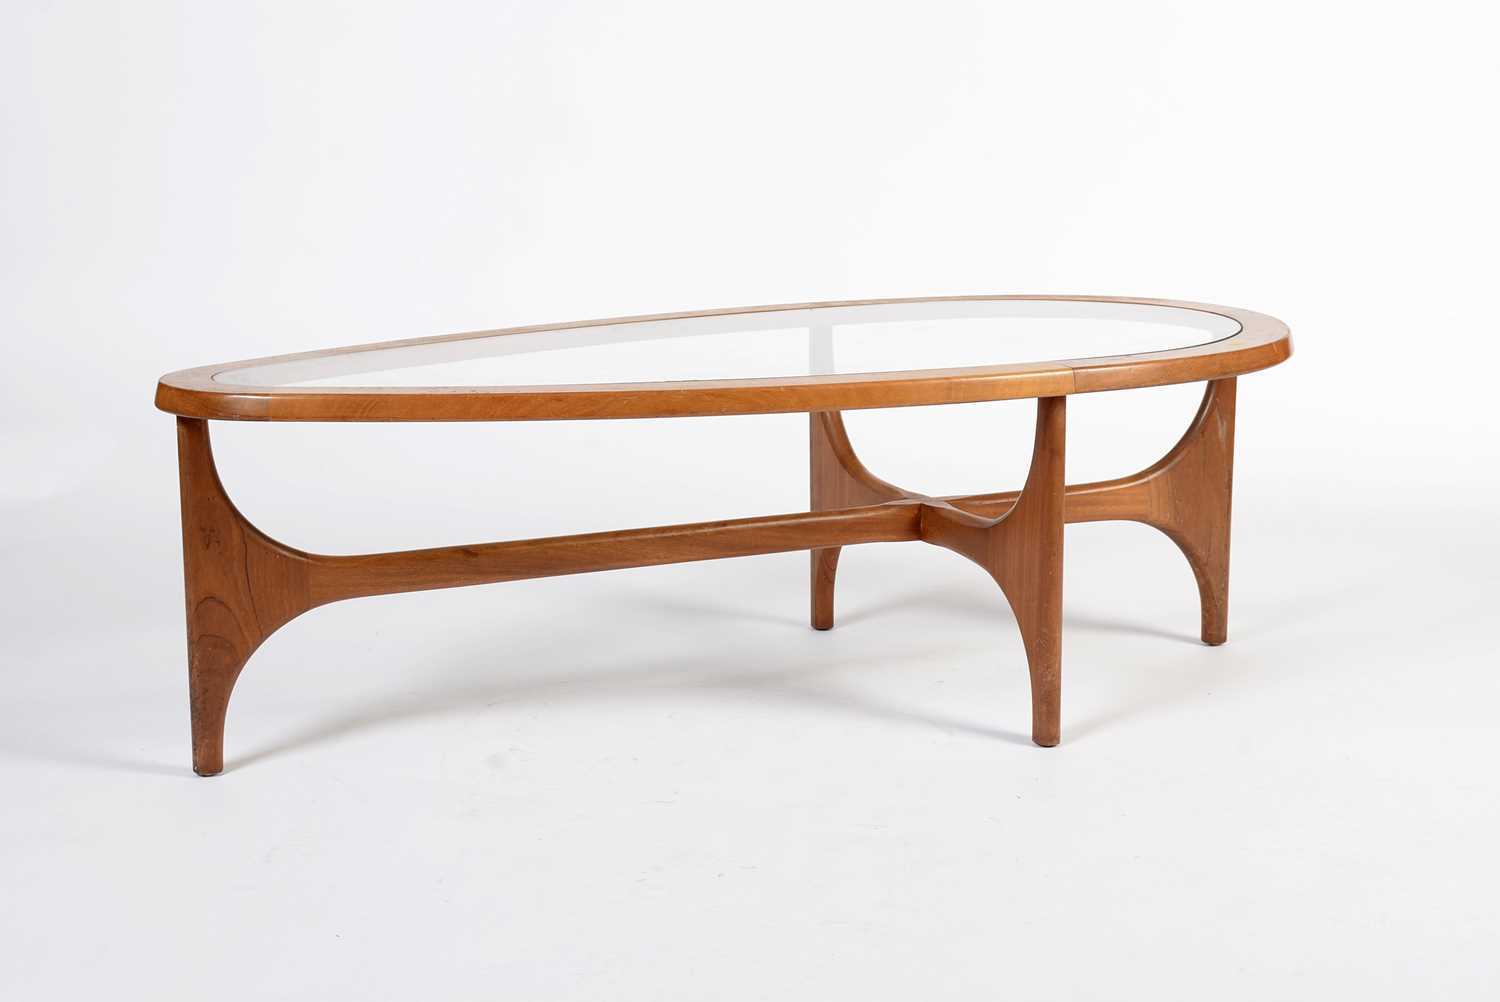 Stateroom by Stonehill: a mid-Century teak and glass coffee table of teardrop form - Image 3 of 8